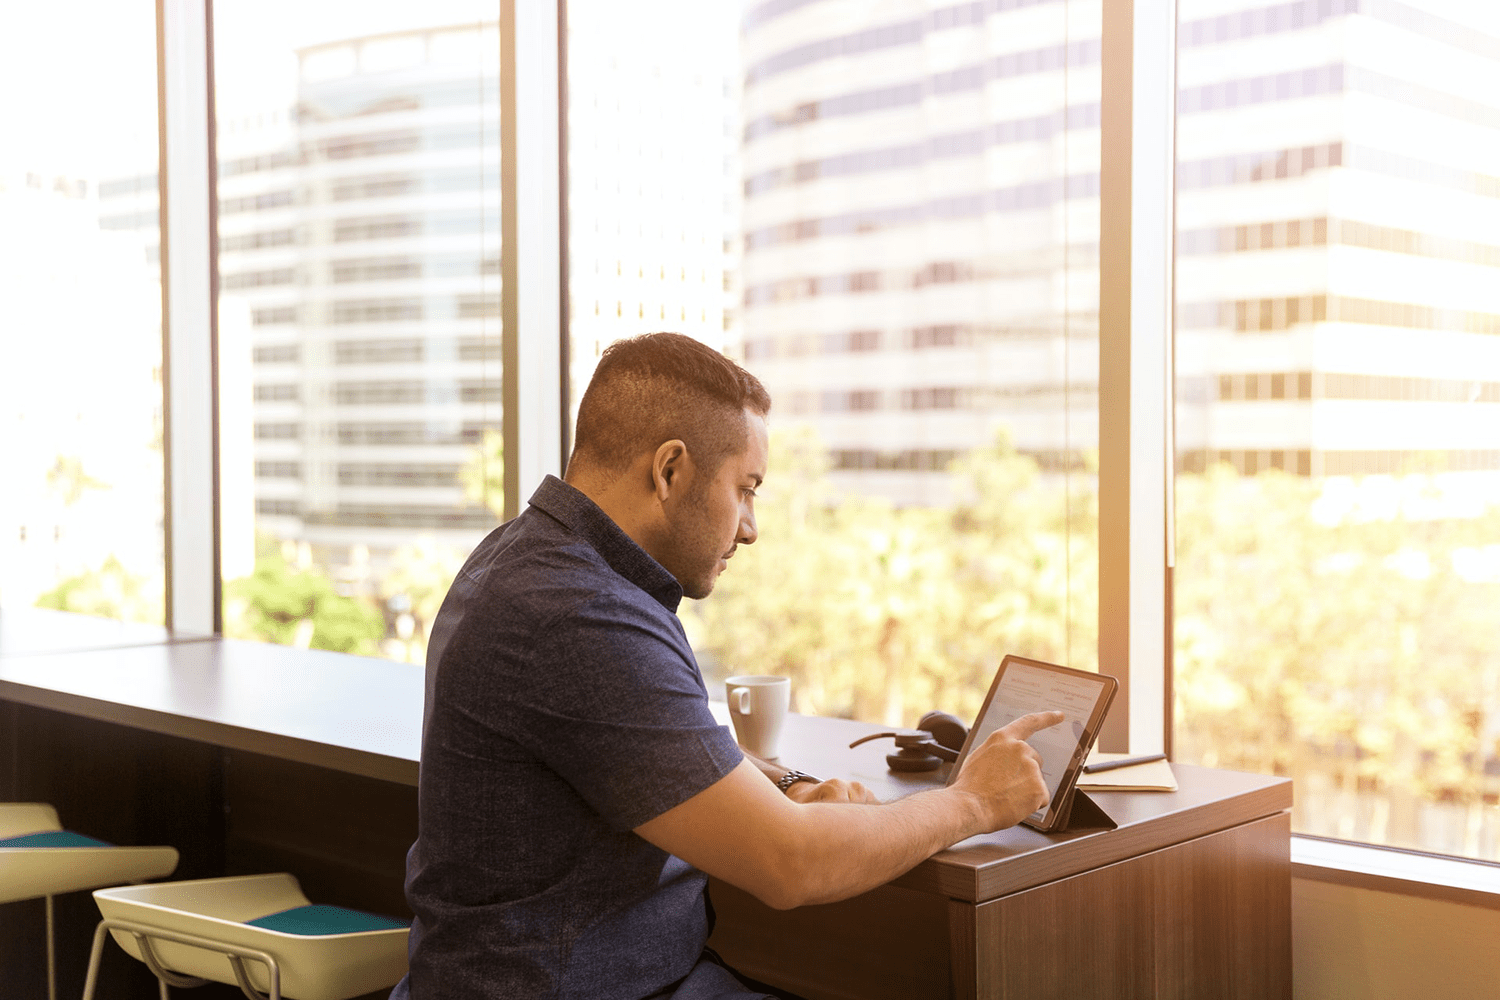 Picture of a man sitting by a window using an iPad